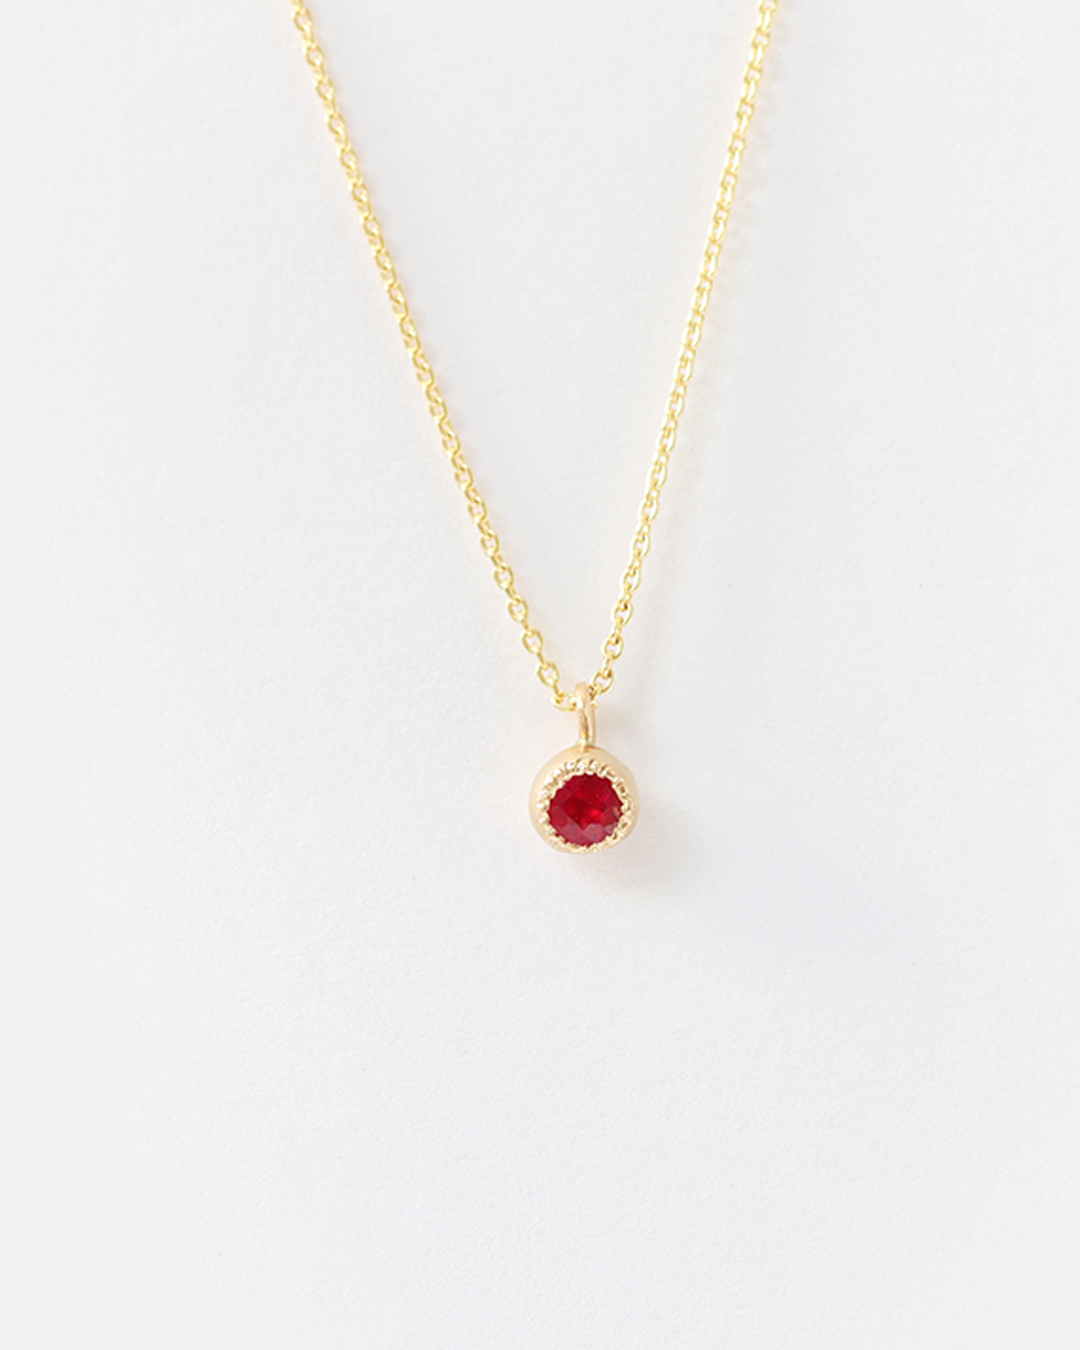 Melee Ball / Ruby Pendant By Hiroyo